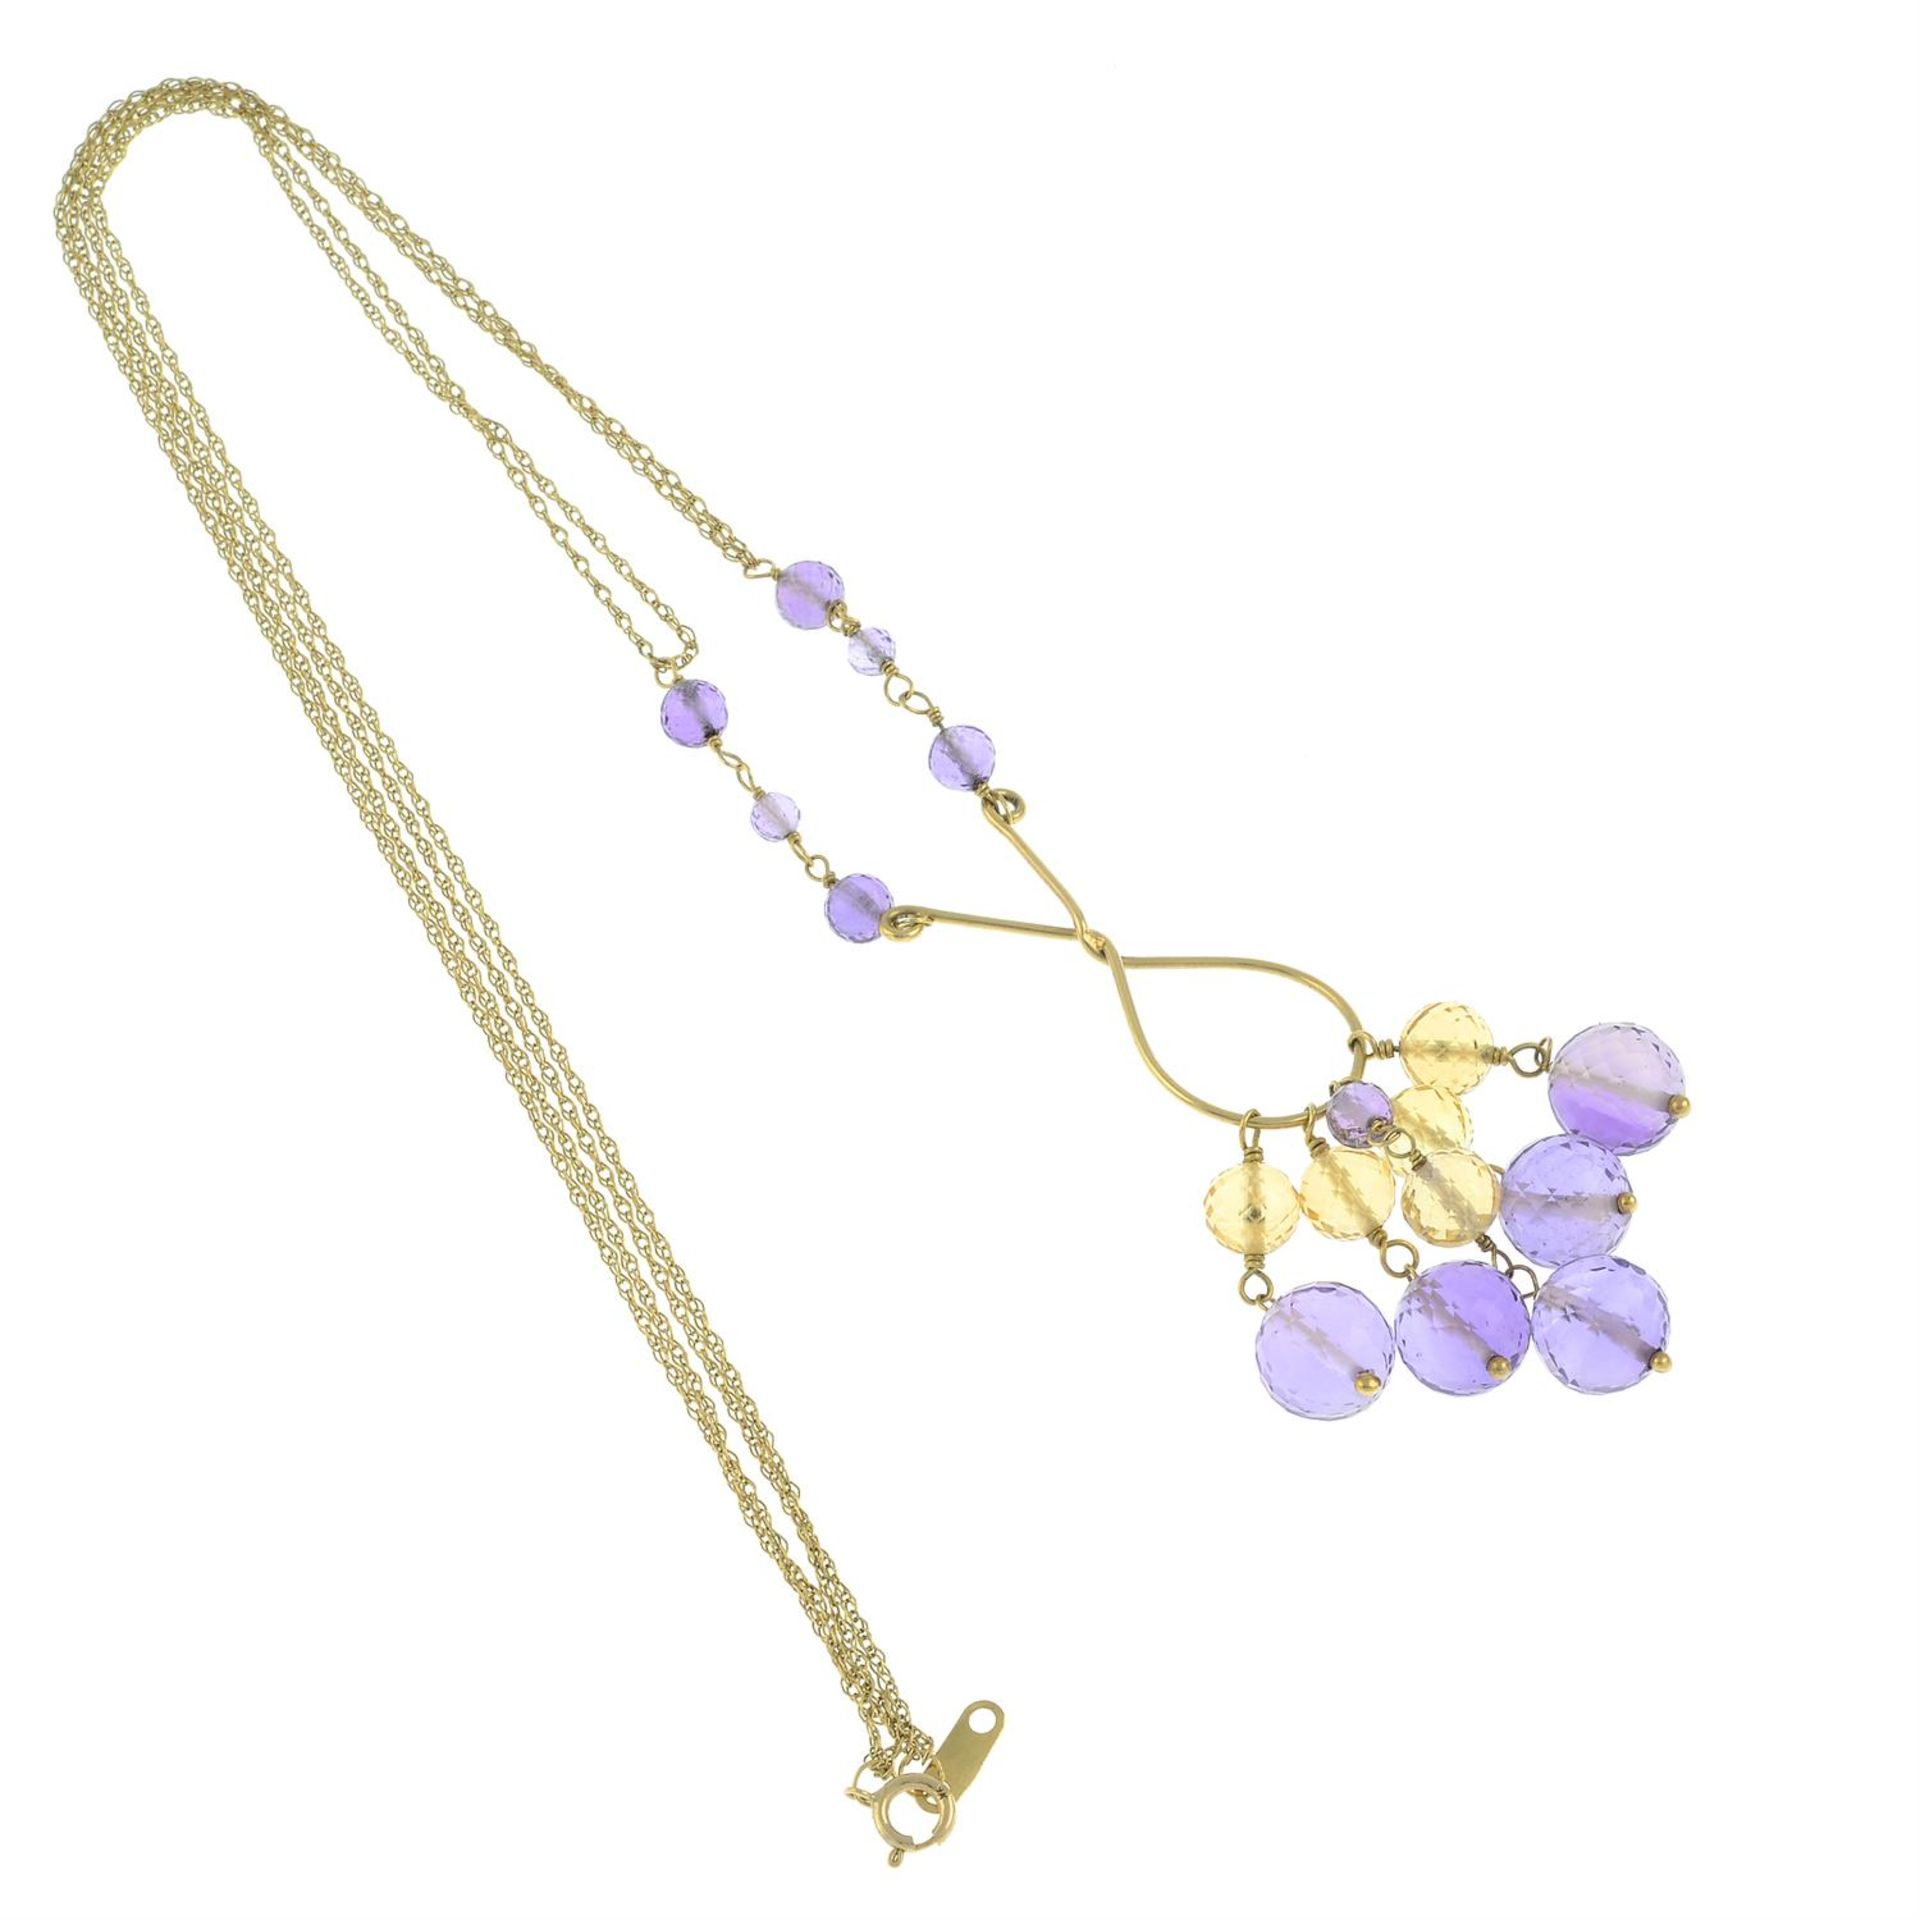 A 9ct gold amethyst and citrine necklace. - Image 2 of 2